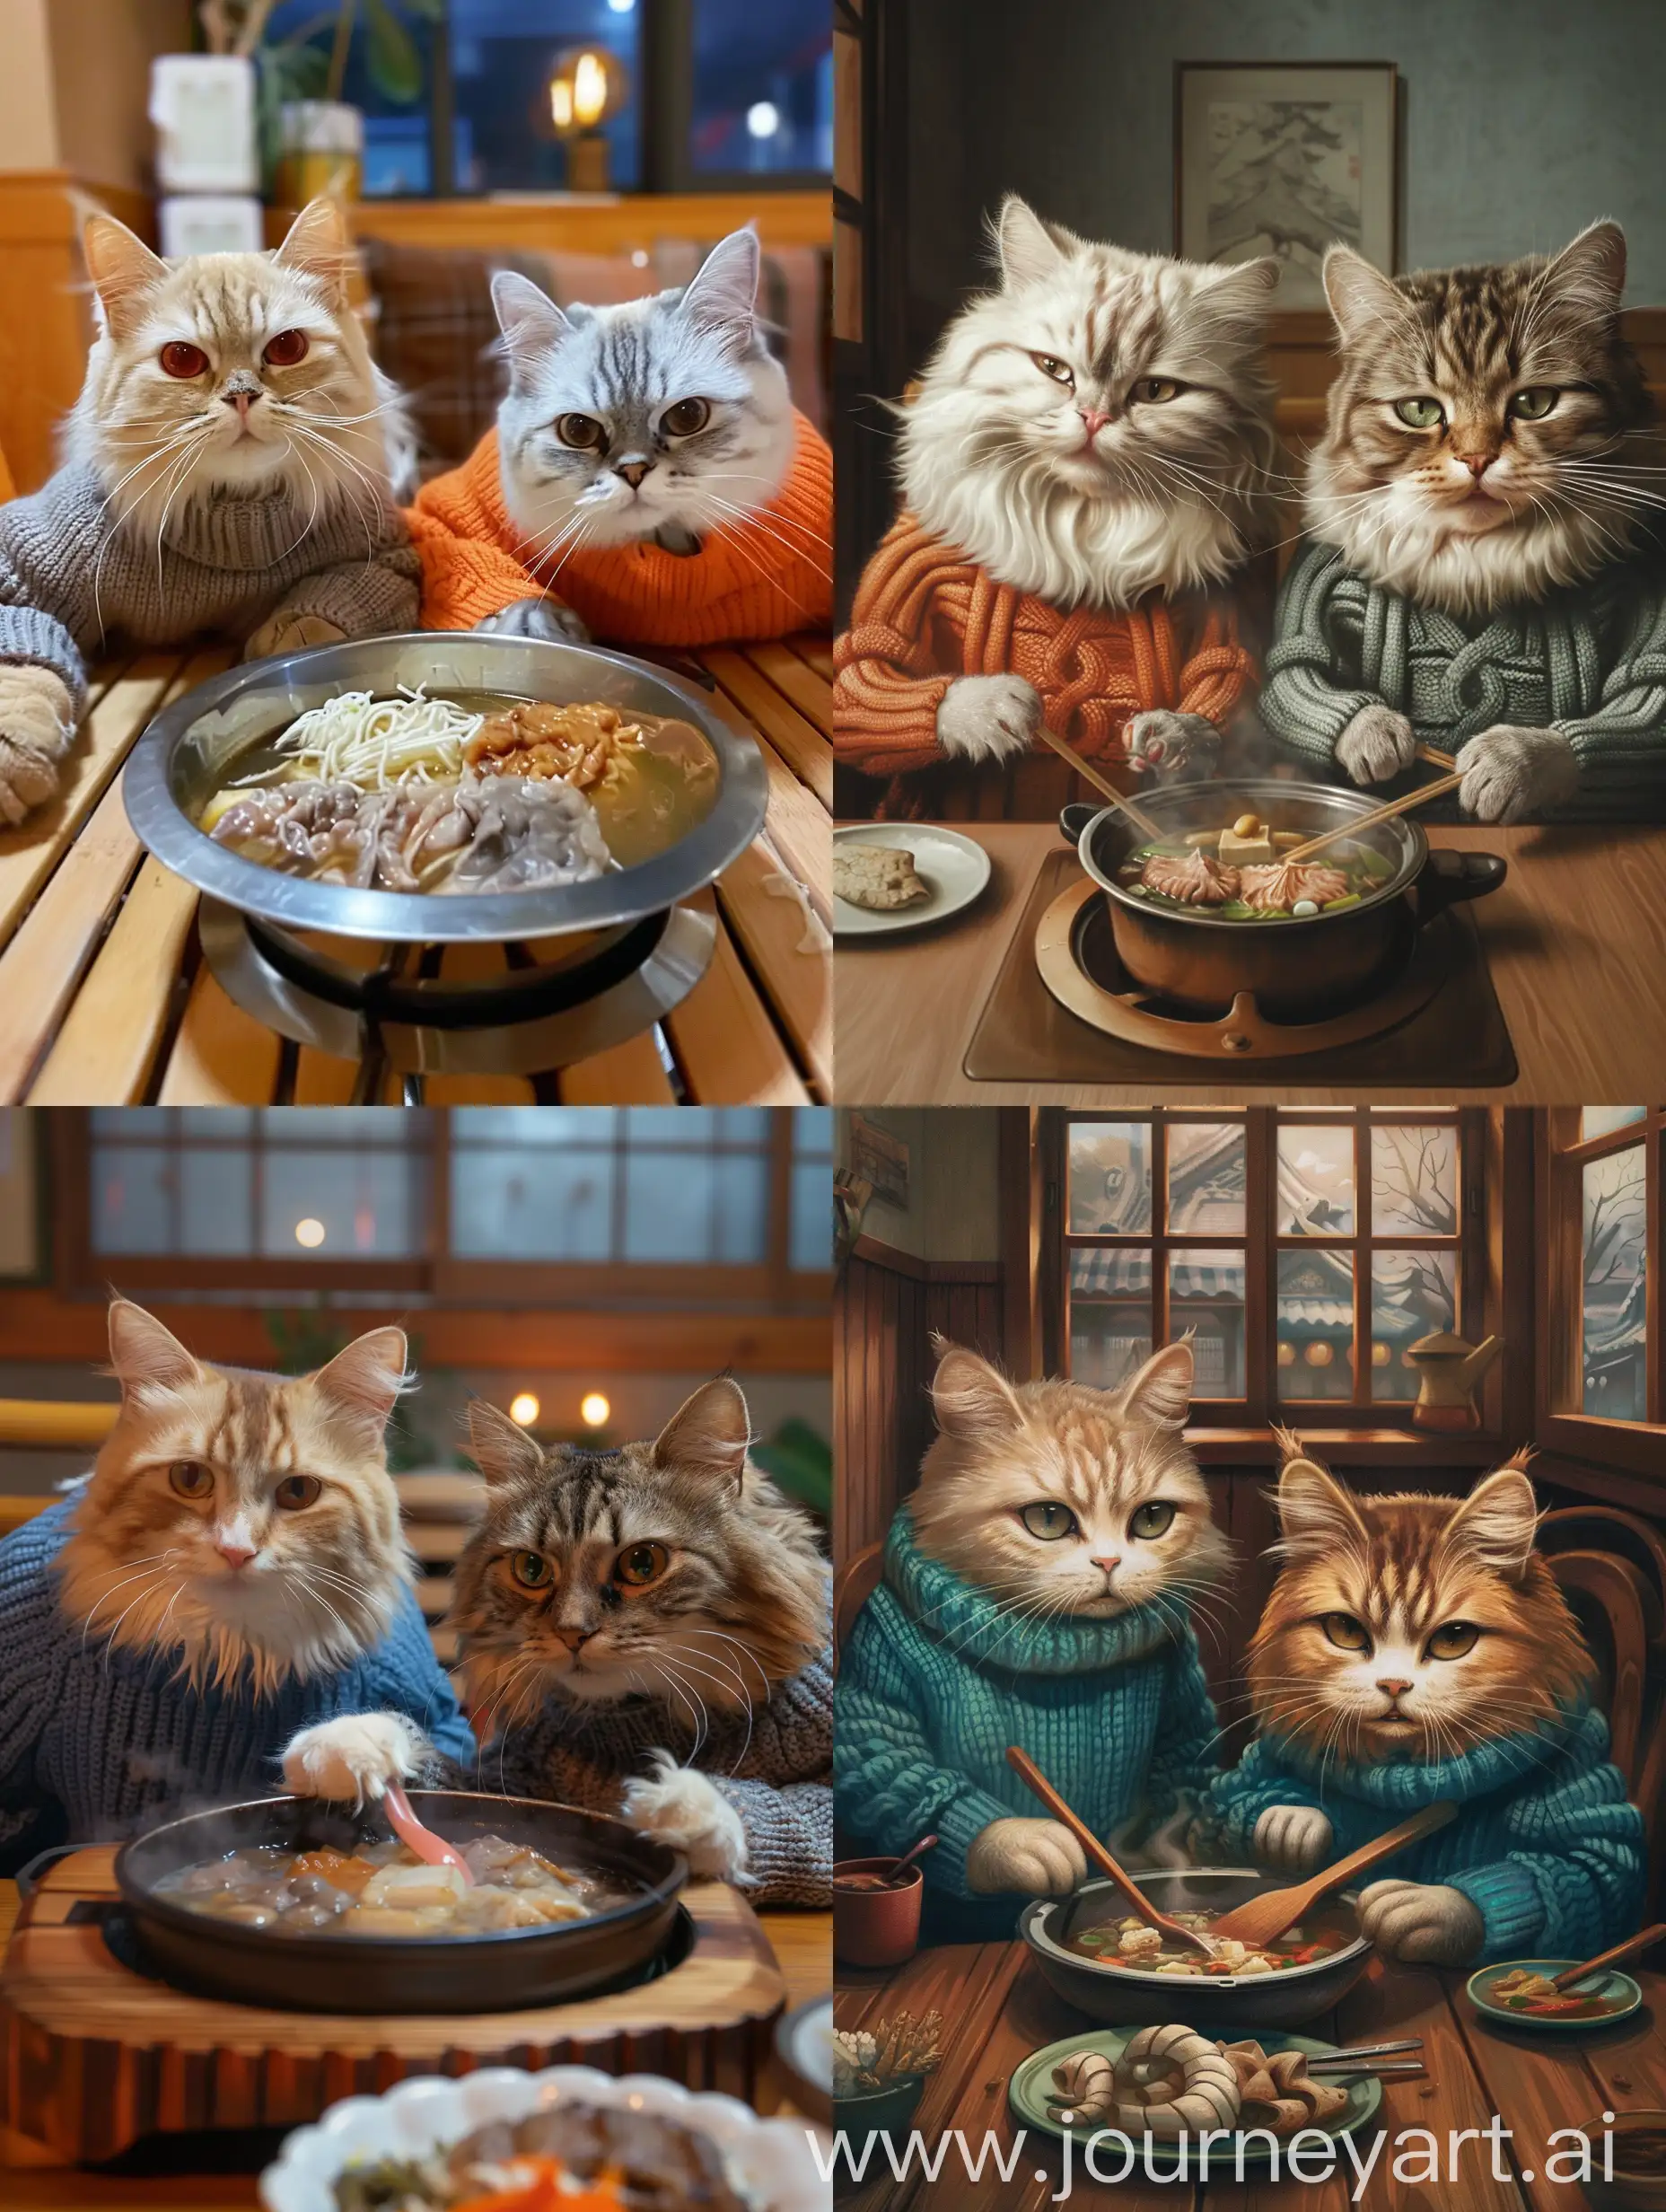 Cozy-Dinner-Two-Cats-in-Woolen-Sweaters-Enjoying-Hotpot-at-Home